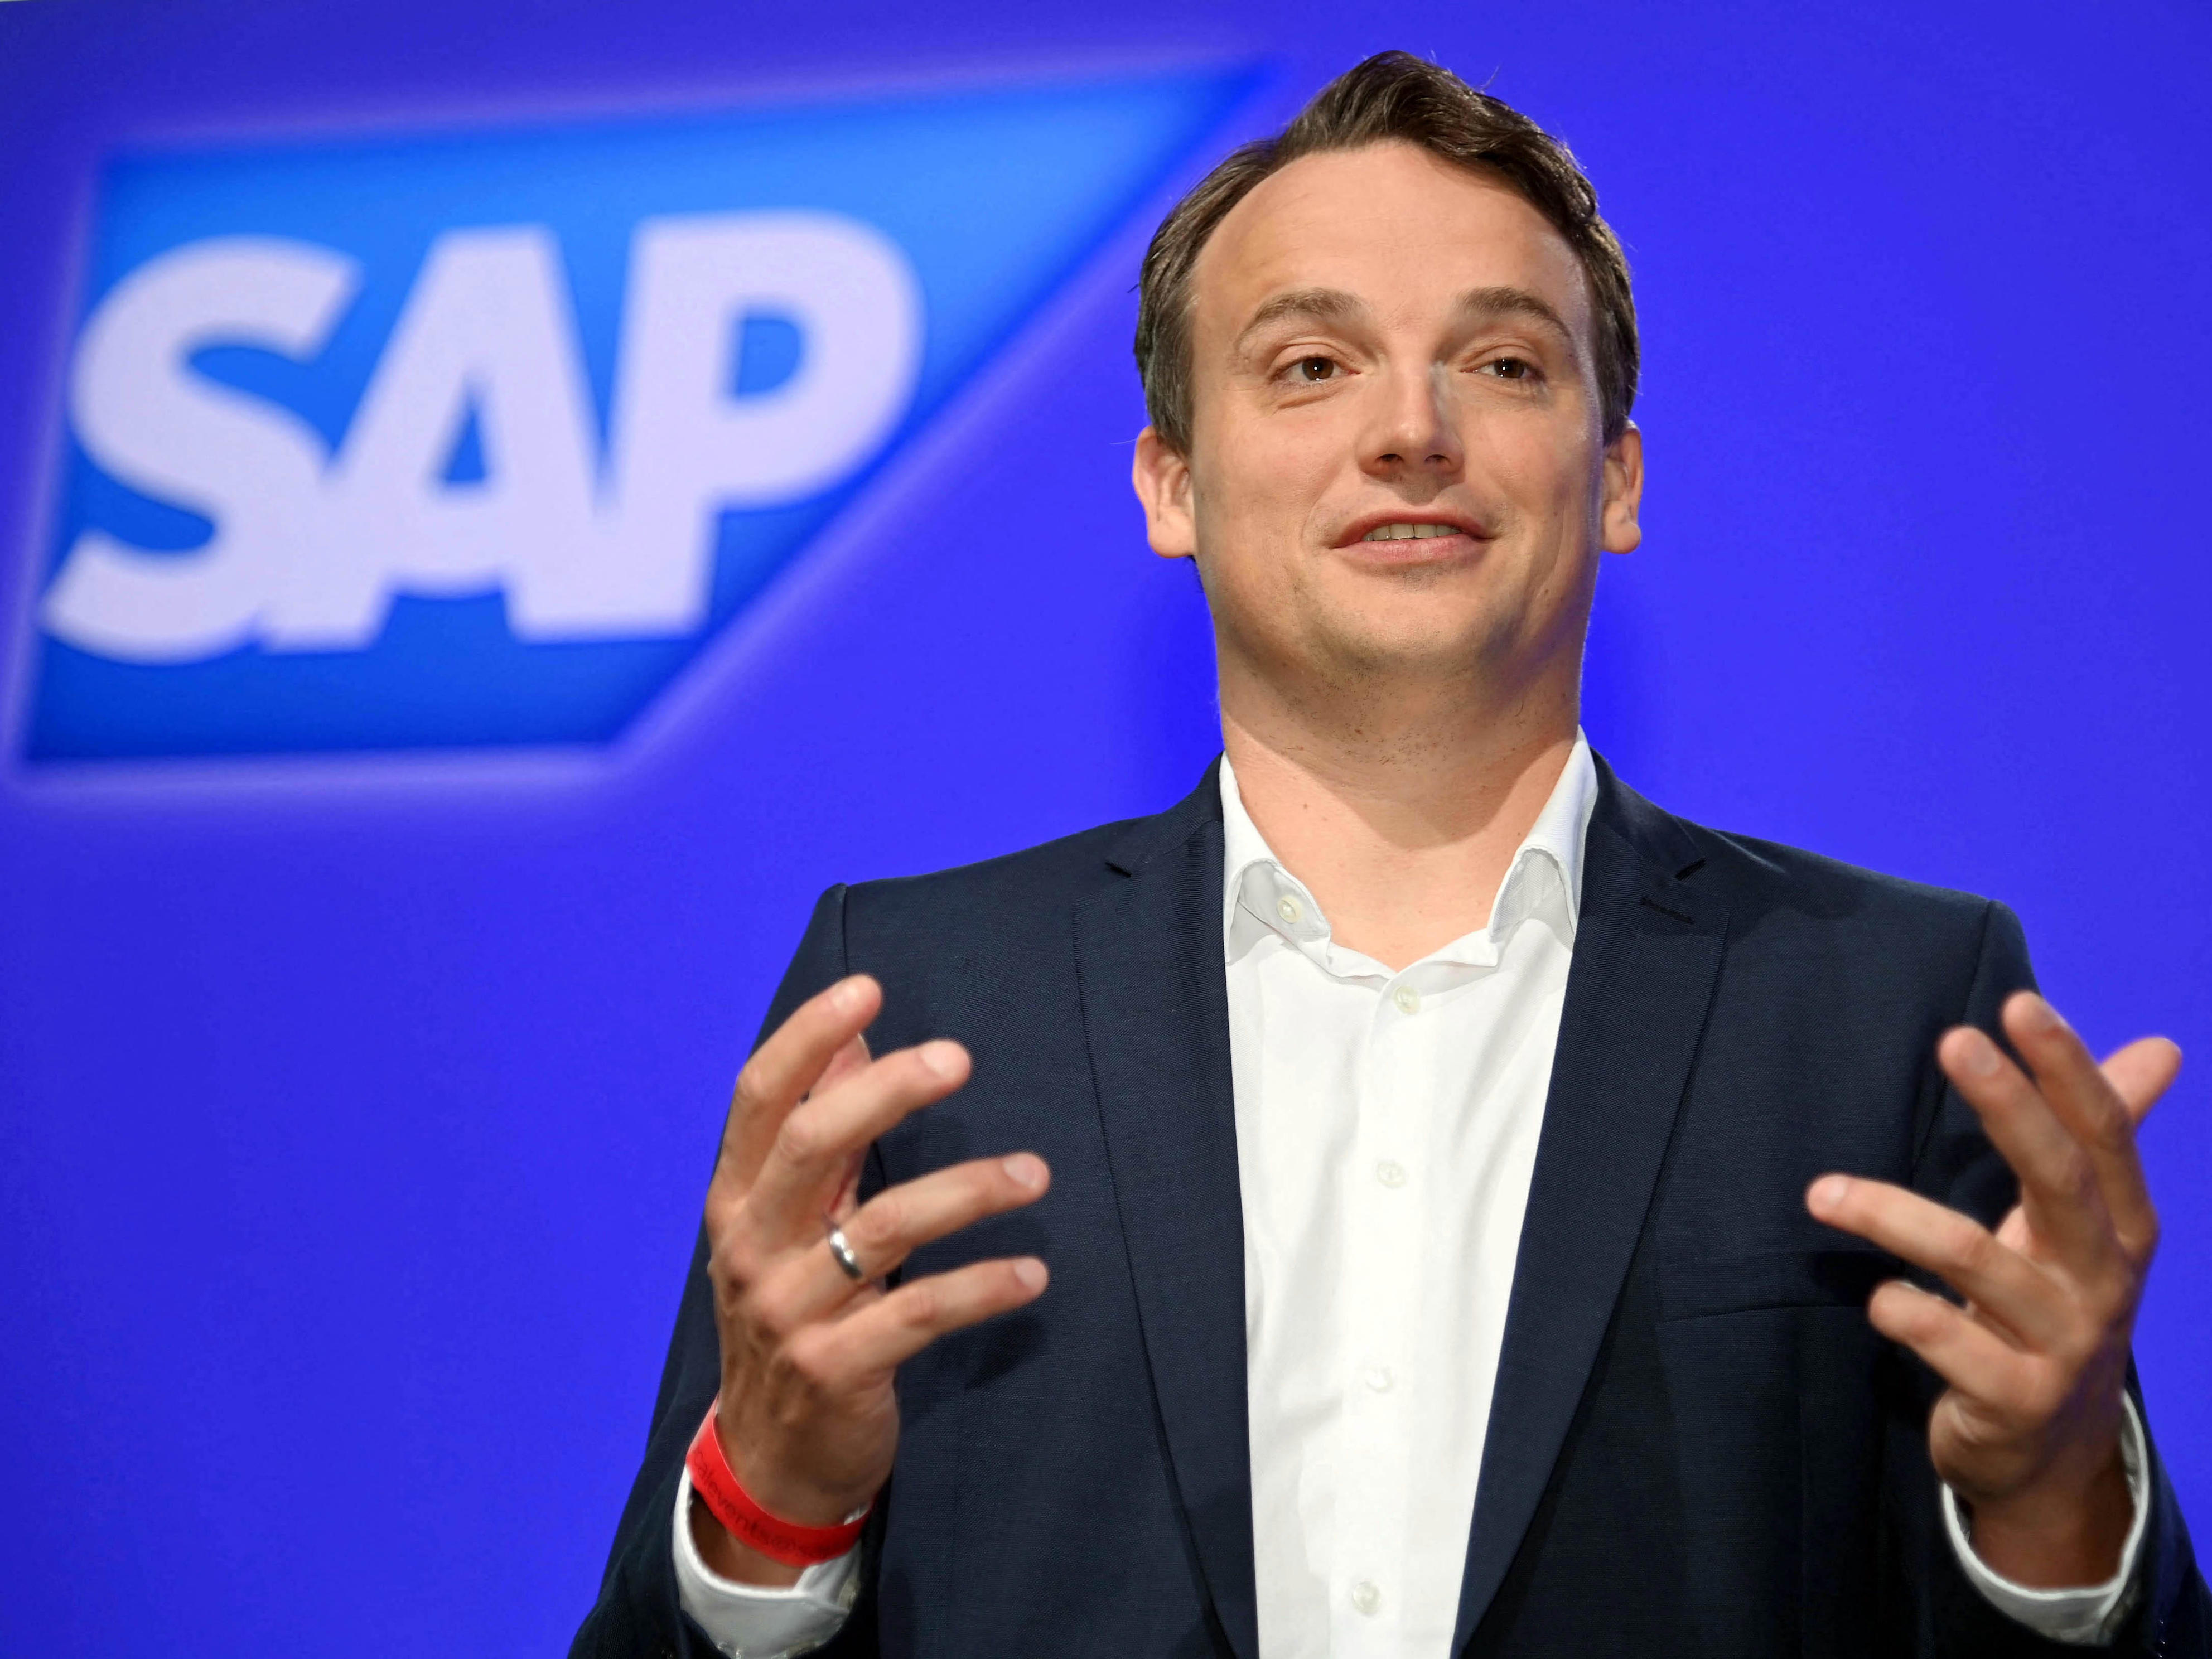 <p>Software company SAP said on January 26 it will slash up to 3,000 jobs globally in response to a profit slump, with many of the cuts coming outside of its headquarters in Berlin, <a href="https://www.wsj.com/articles/sap-to-cut-3-000-jobs-after-profit-plunges-11674724001" rel="noopener">the Wall Street Journal reported</a>.  </p><p>The layoffs will impact an estimated 2.5% or the company's workforce and are part of a cost-cutting initiative aiming to reach annual savings of $382 million in 2024, according to the Journal. </p><p>"The purpose is to further focus on strategic growth areas," said Luka Mucic, SAP's chief financial officer, per the Journal.  </p>